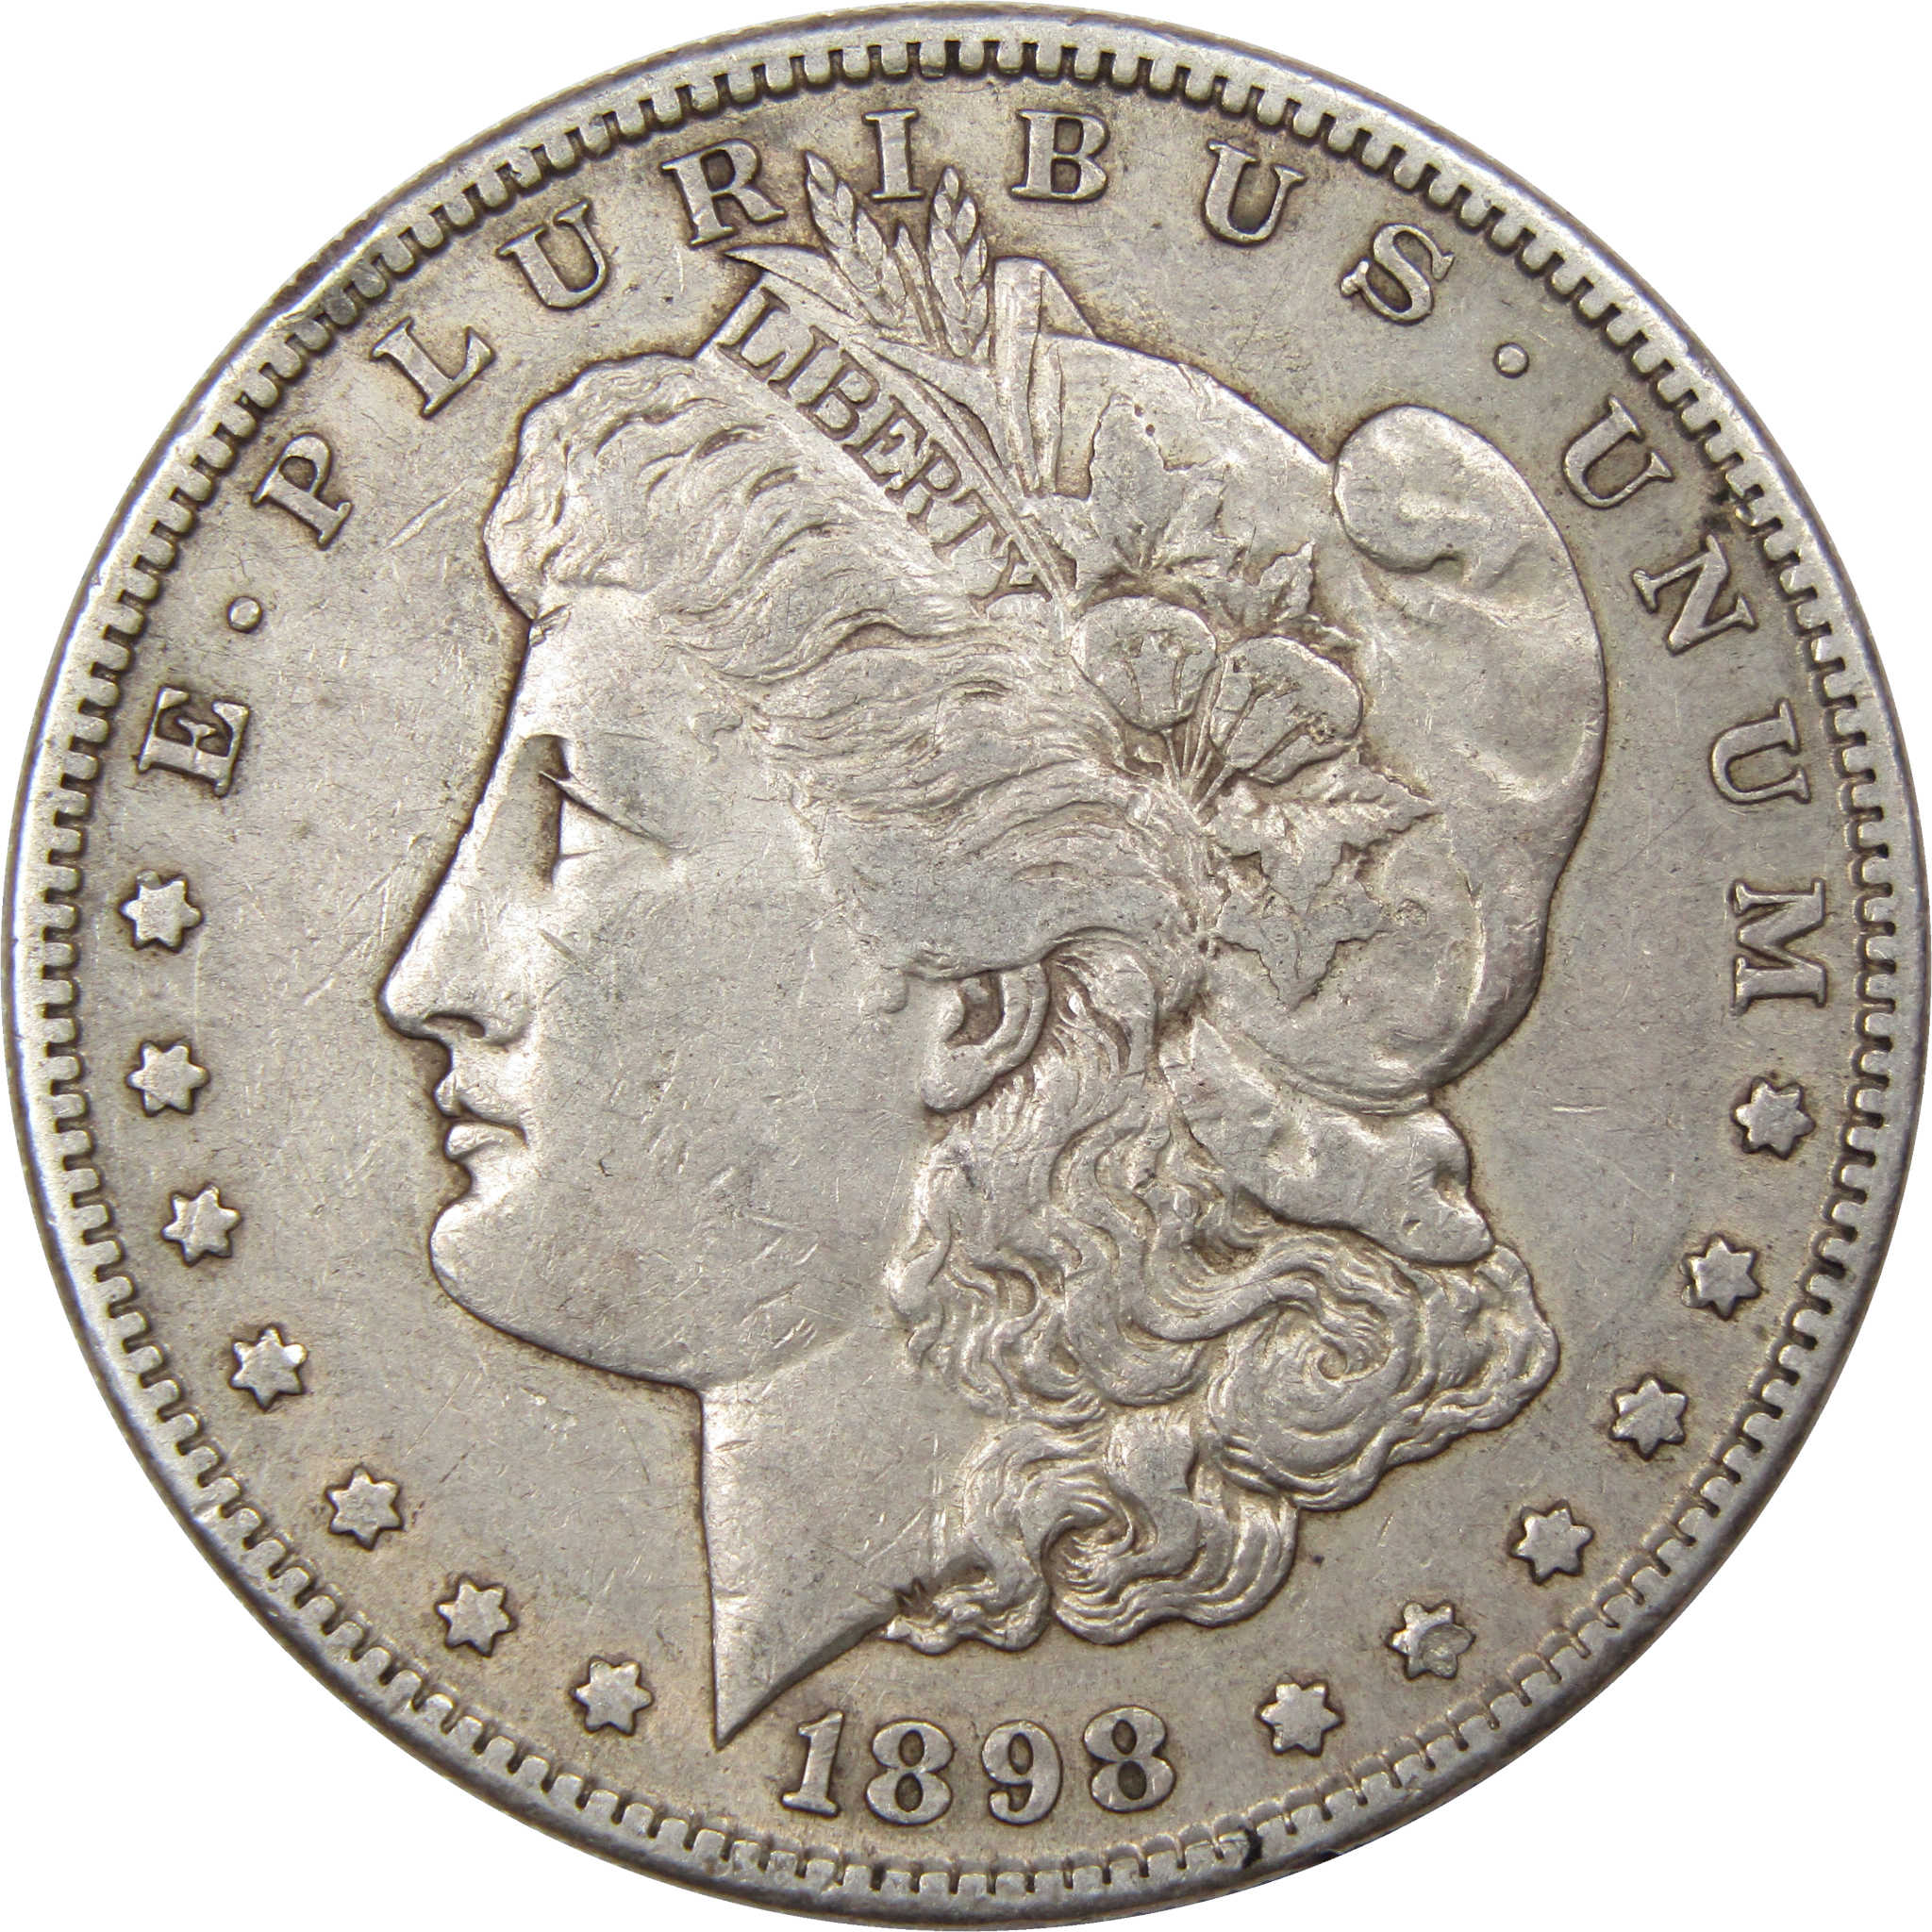 1898 S Morgan Dollar XF EF Extremely Fine 90% Silver Coin SKU:I1585 - Morgan coin - Morgan silver dollar - Morgan silver dollar for sale - Profile Coins &amp; Collectibles